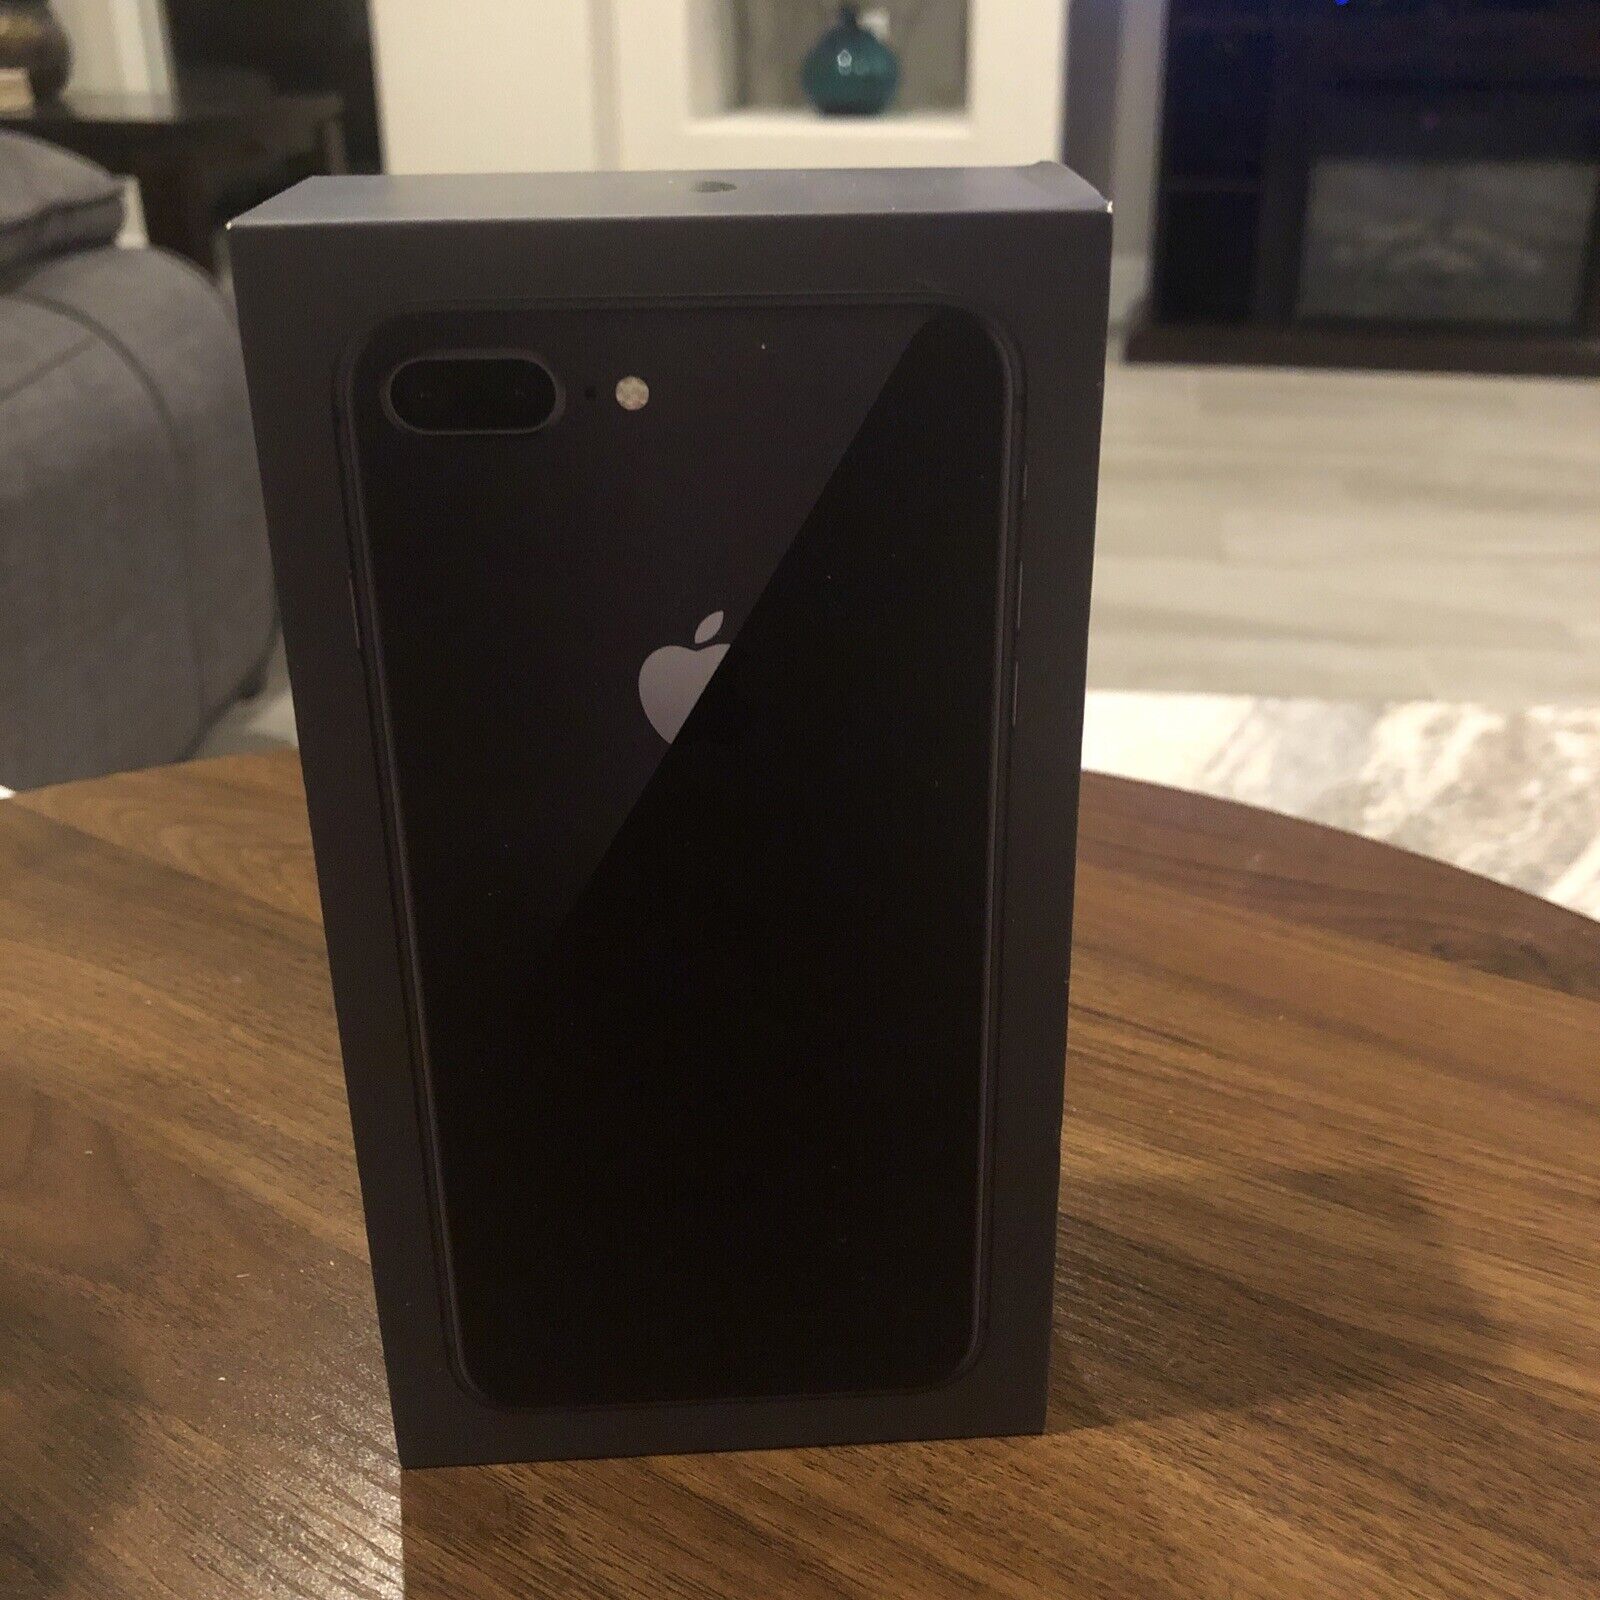 Apple Iphone 8 Plus Space Gray 64GB Box Only No Phone OEM